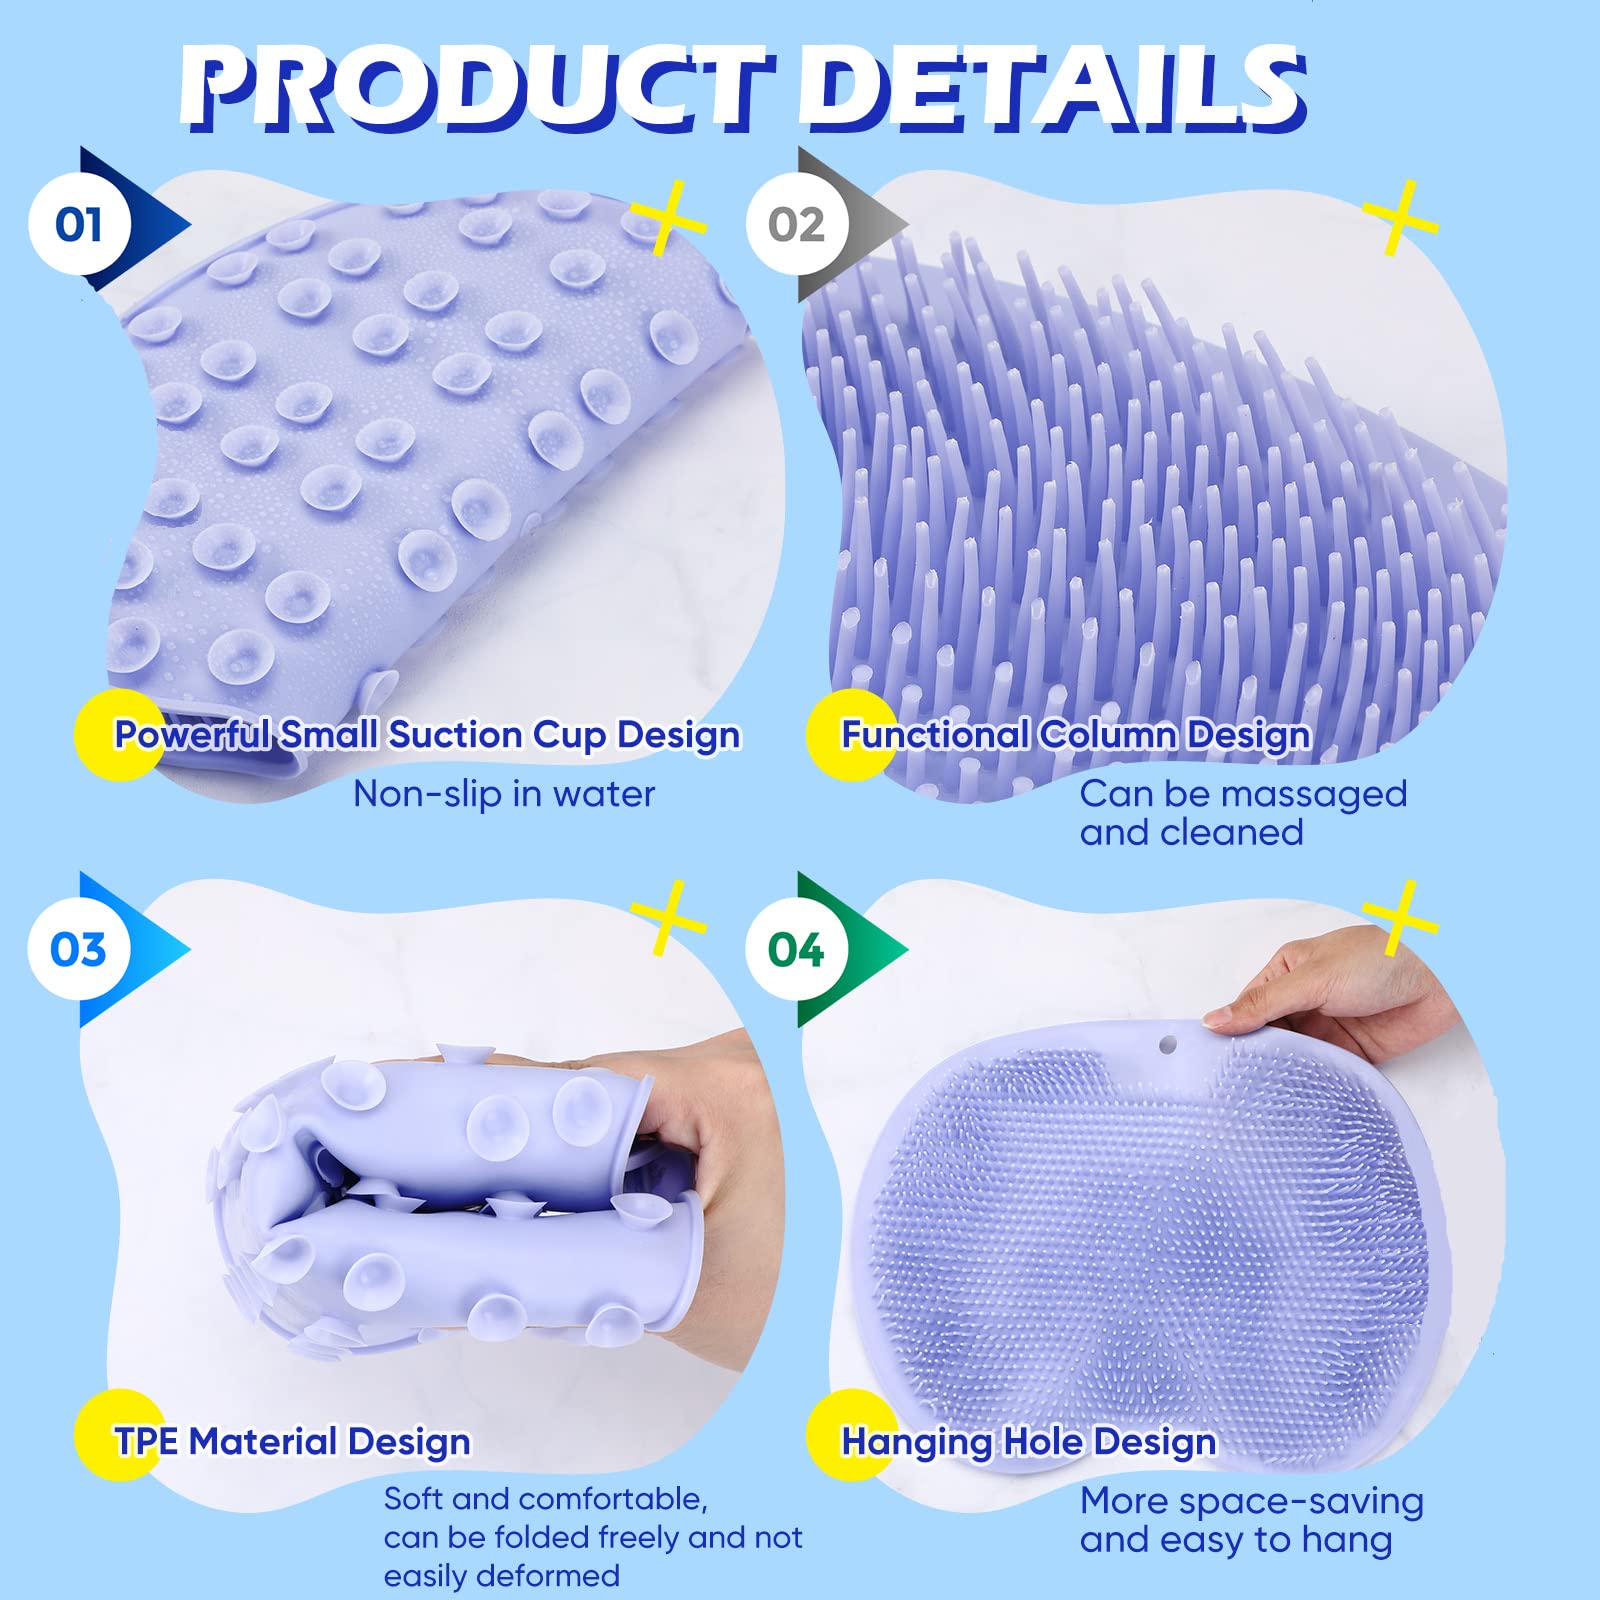 2 Pieces Shower Foot Scrubber Mat Hands Free Back Scrubber for Shower Wall Mounted Bath Massage Pad Back Scrubber Back with Non Slip Suction Cups Foot Cleaner for Men Women (Gray, Blue)